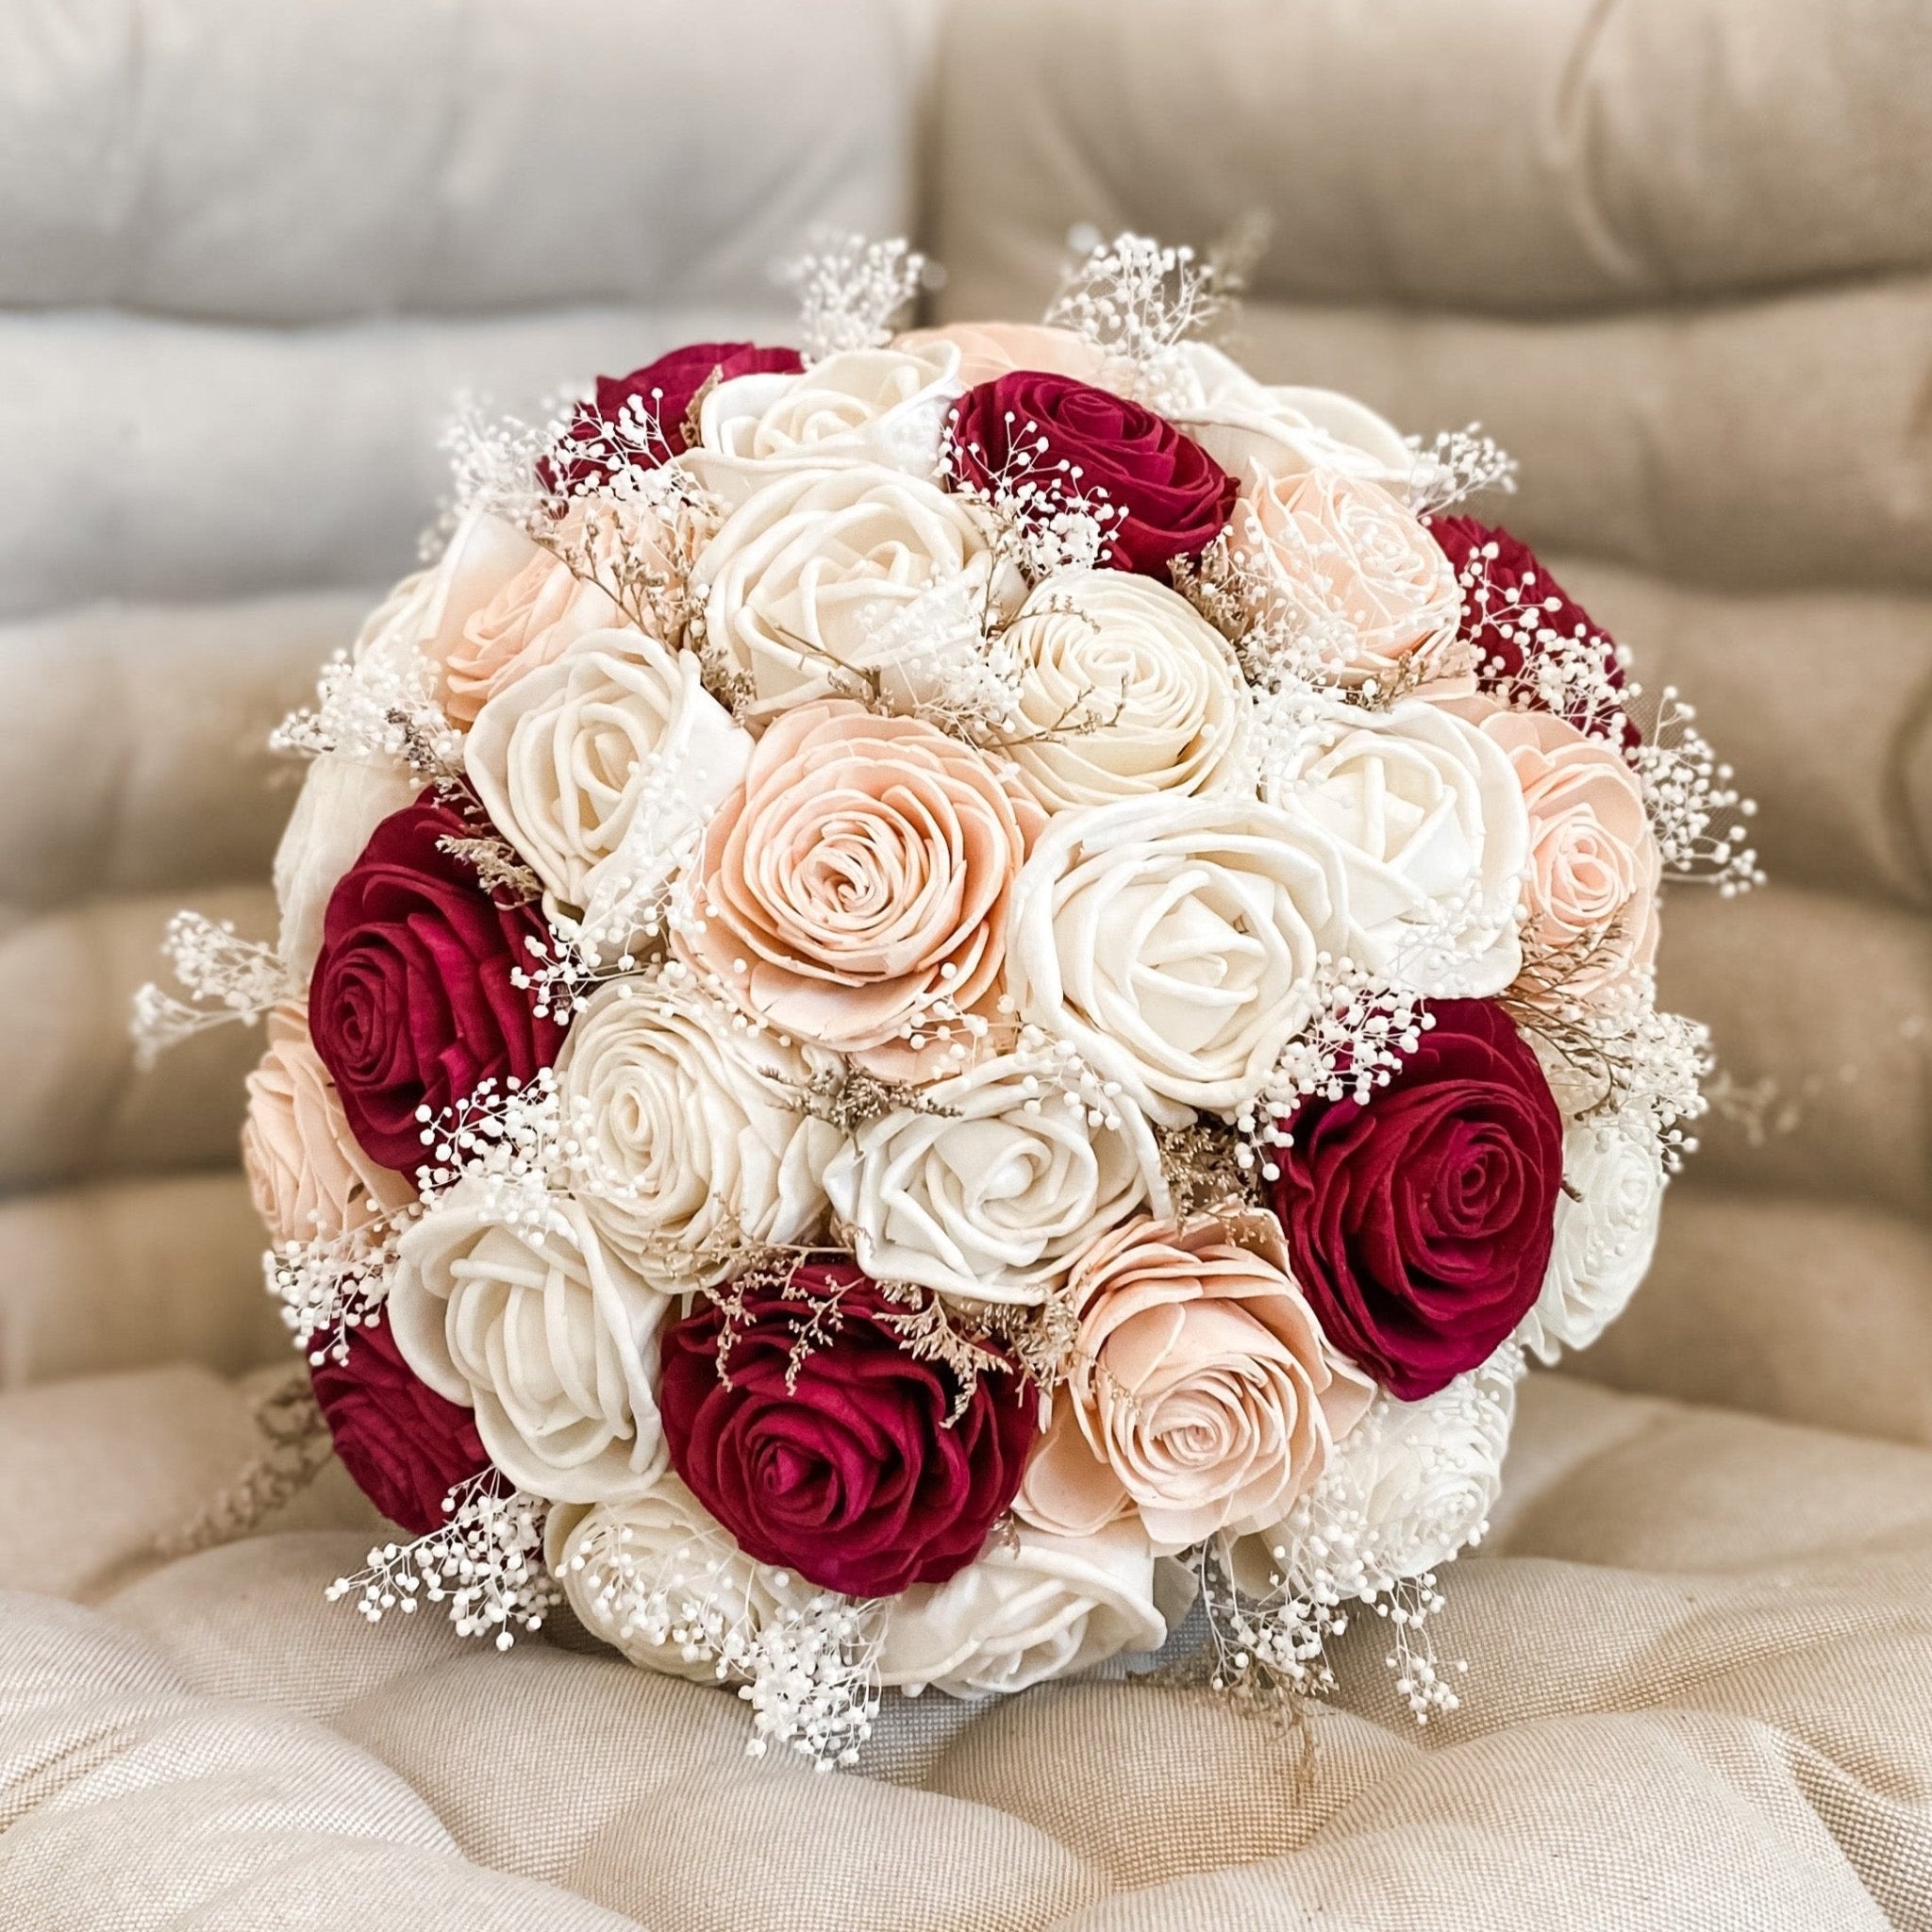 Romantic Rhapsody, Bridal Bouquet with Burgundy, Blush and Ivory Roses - PapiroExtra Large 12" Bride